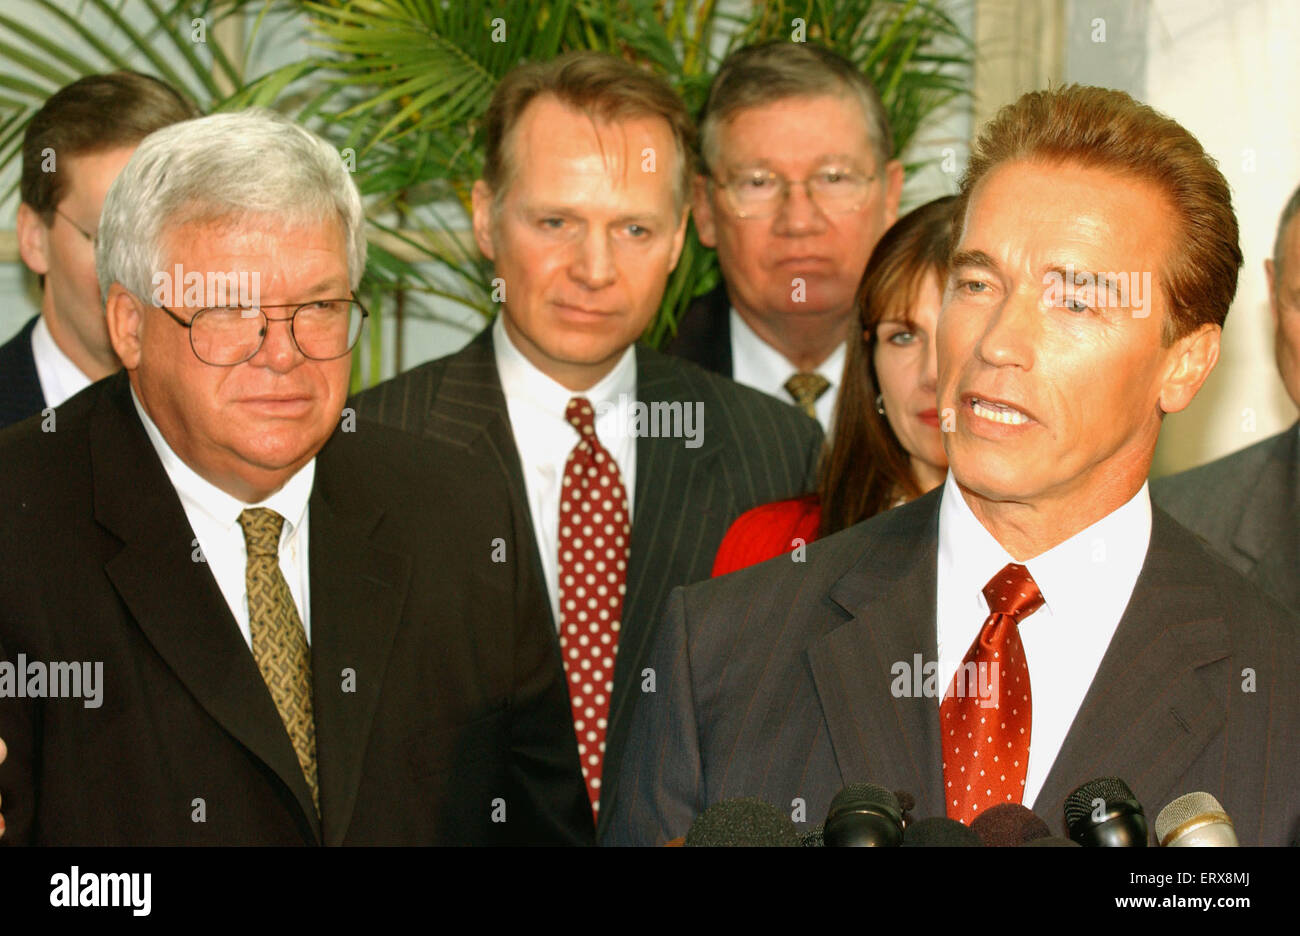 Washington, DC - October 29, 2009 -- California Governor-elect Arnold Schwarzenegger, right, meets reporters in the United States Capitol in Washington, DC on October 29, 2003. He was meeting with the U.S. House Republican Conference to discuss ways to bring more money to California to help eliminate its financial crisis. United States House Speaker Dennis Hastert is at left with other members of the Republican Conference.Credit: Ron Sachs/CNP - NO WIRE SERVICE - Stock Photo